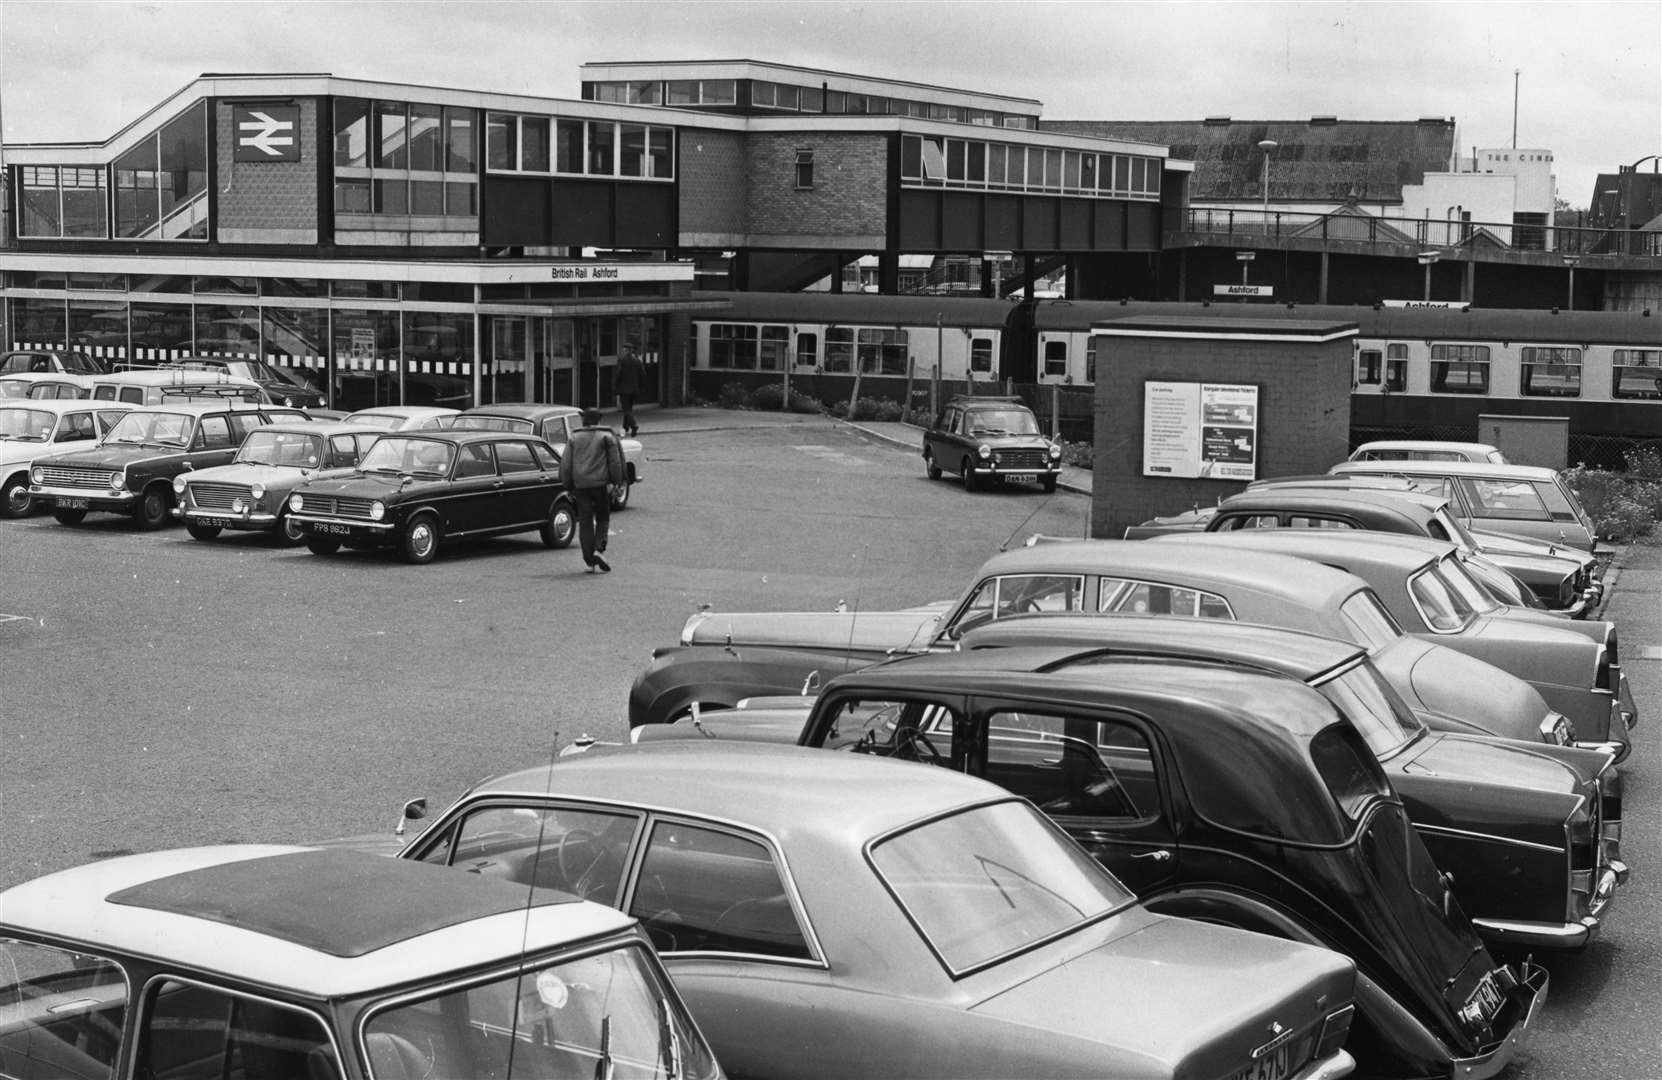 The old, elevated, station buildings in Ashford - with the old cinema just visible in the top right of the image. Picture: Steve Salter